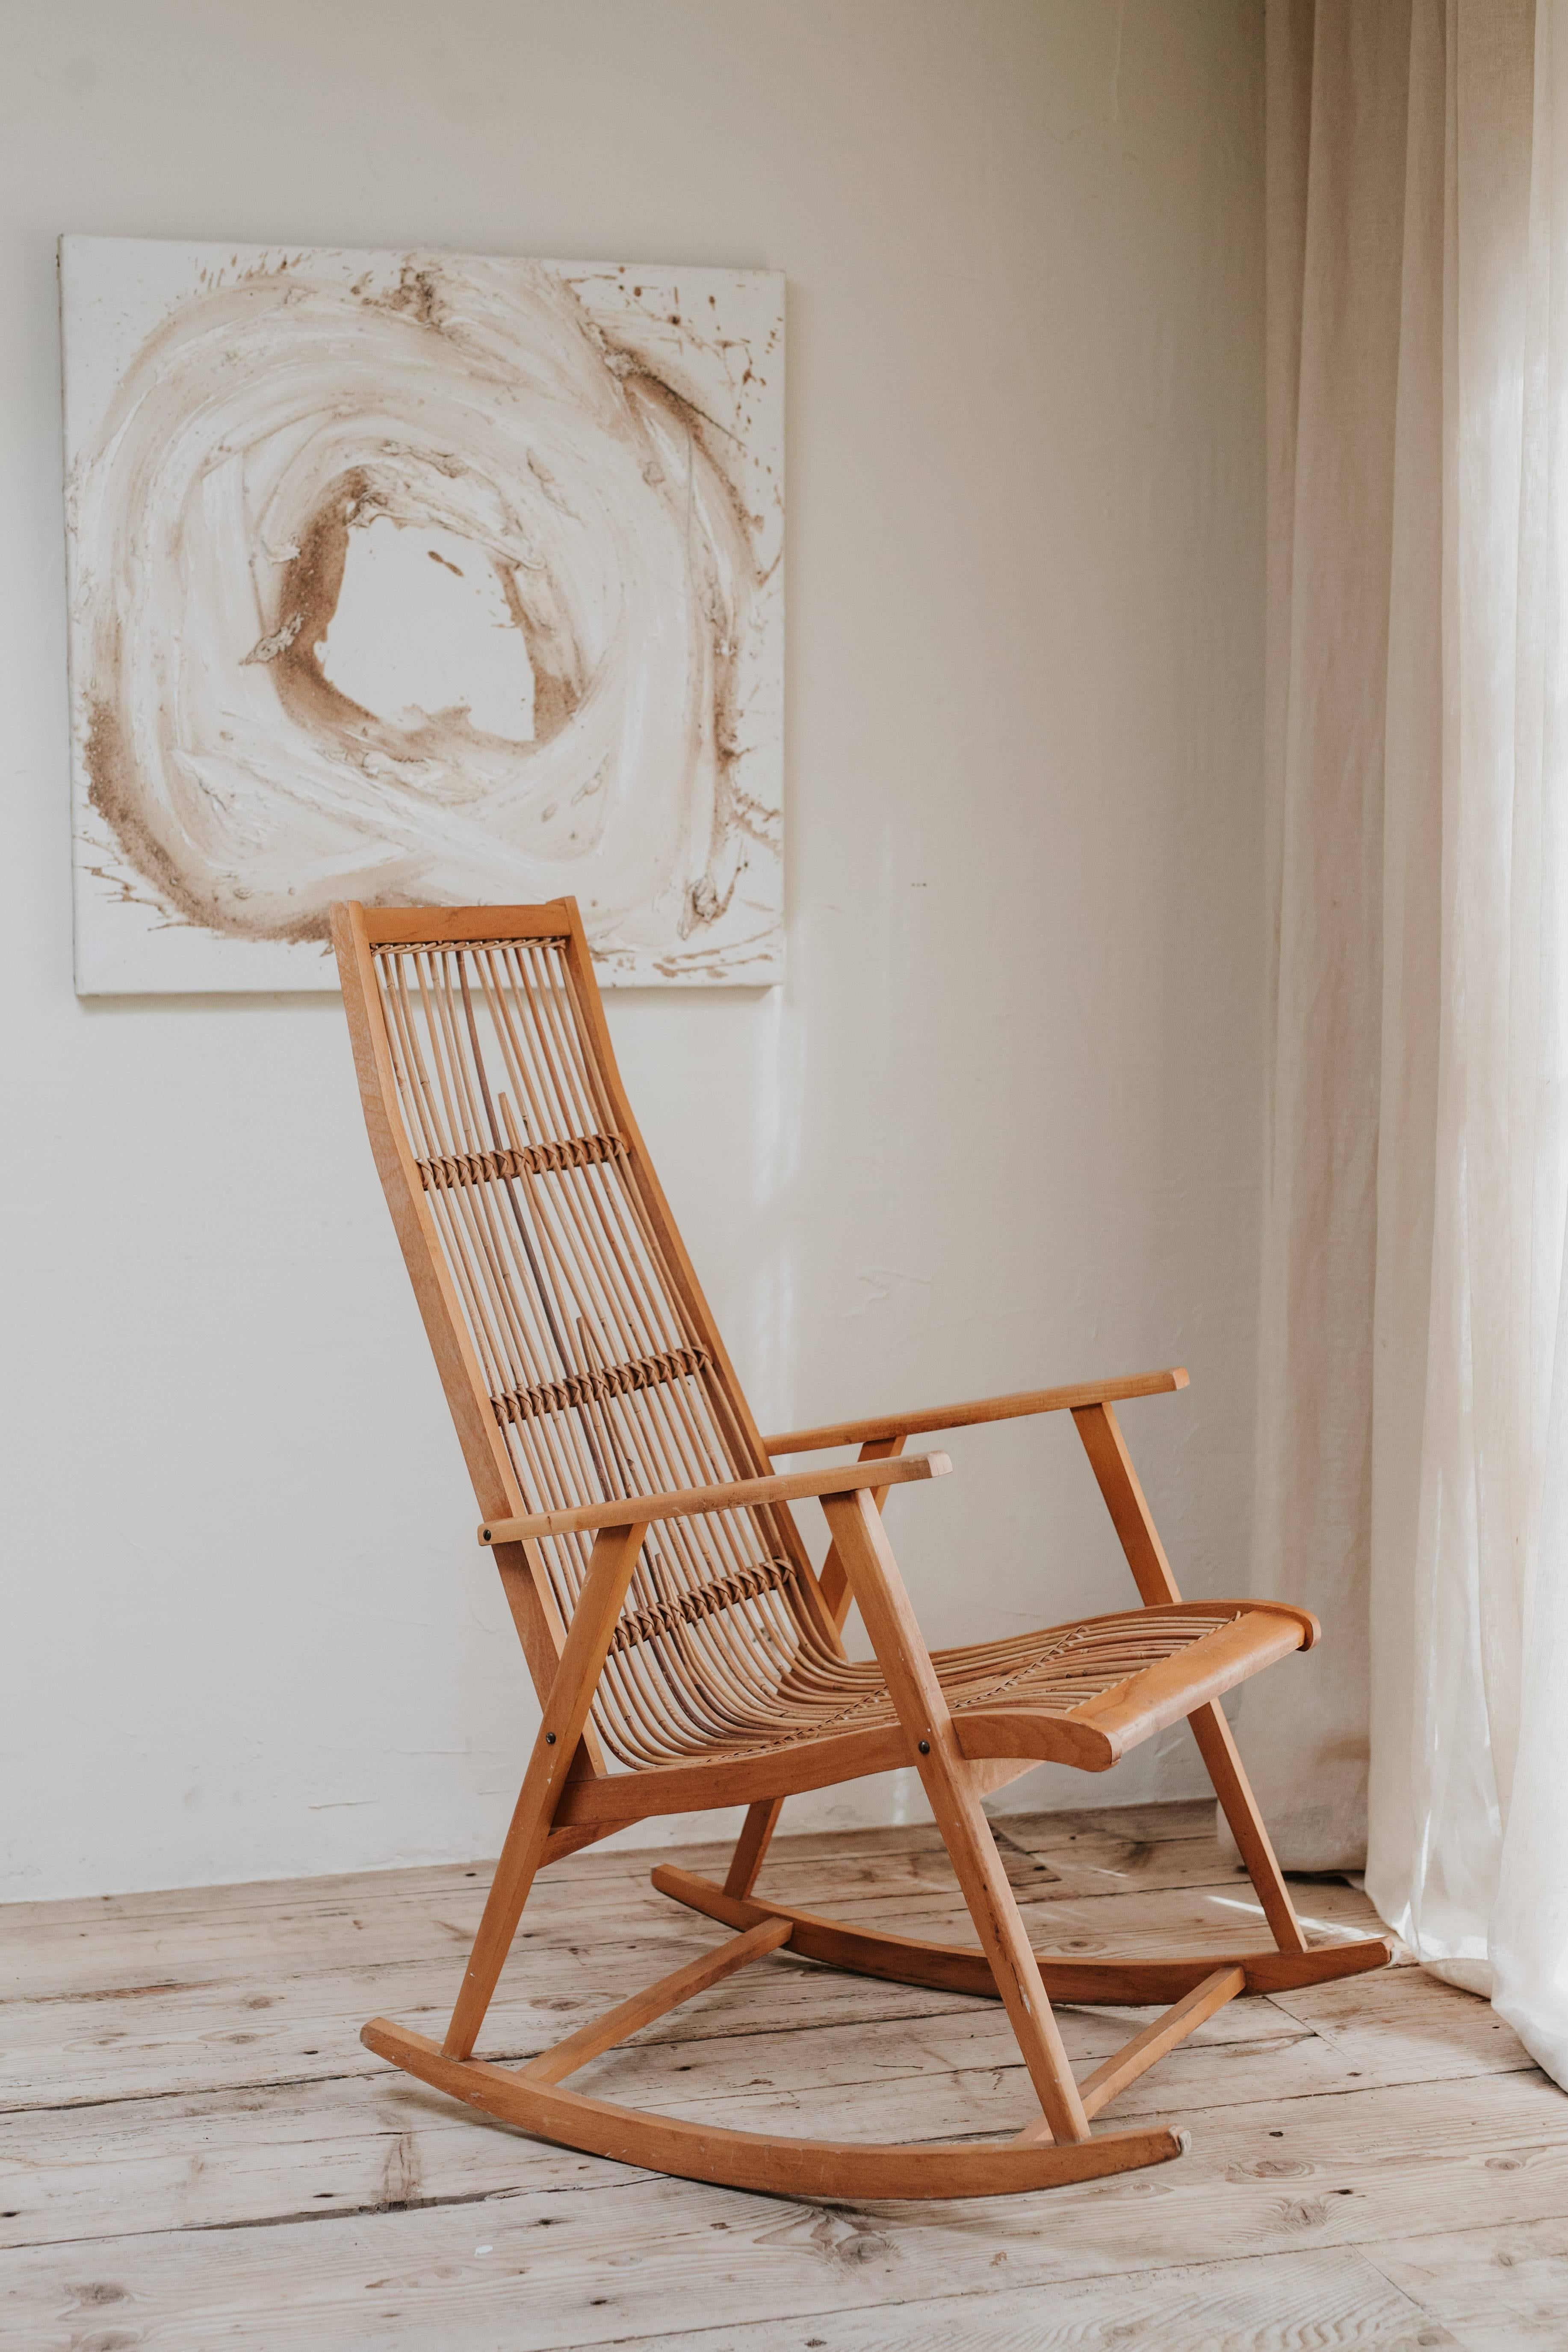 This is a very smart wood and rattan vintage rocking chair, made during the 1960s in Germany.